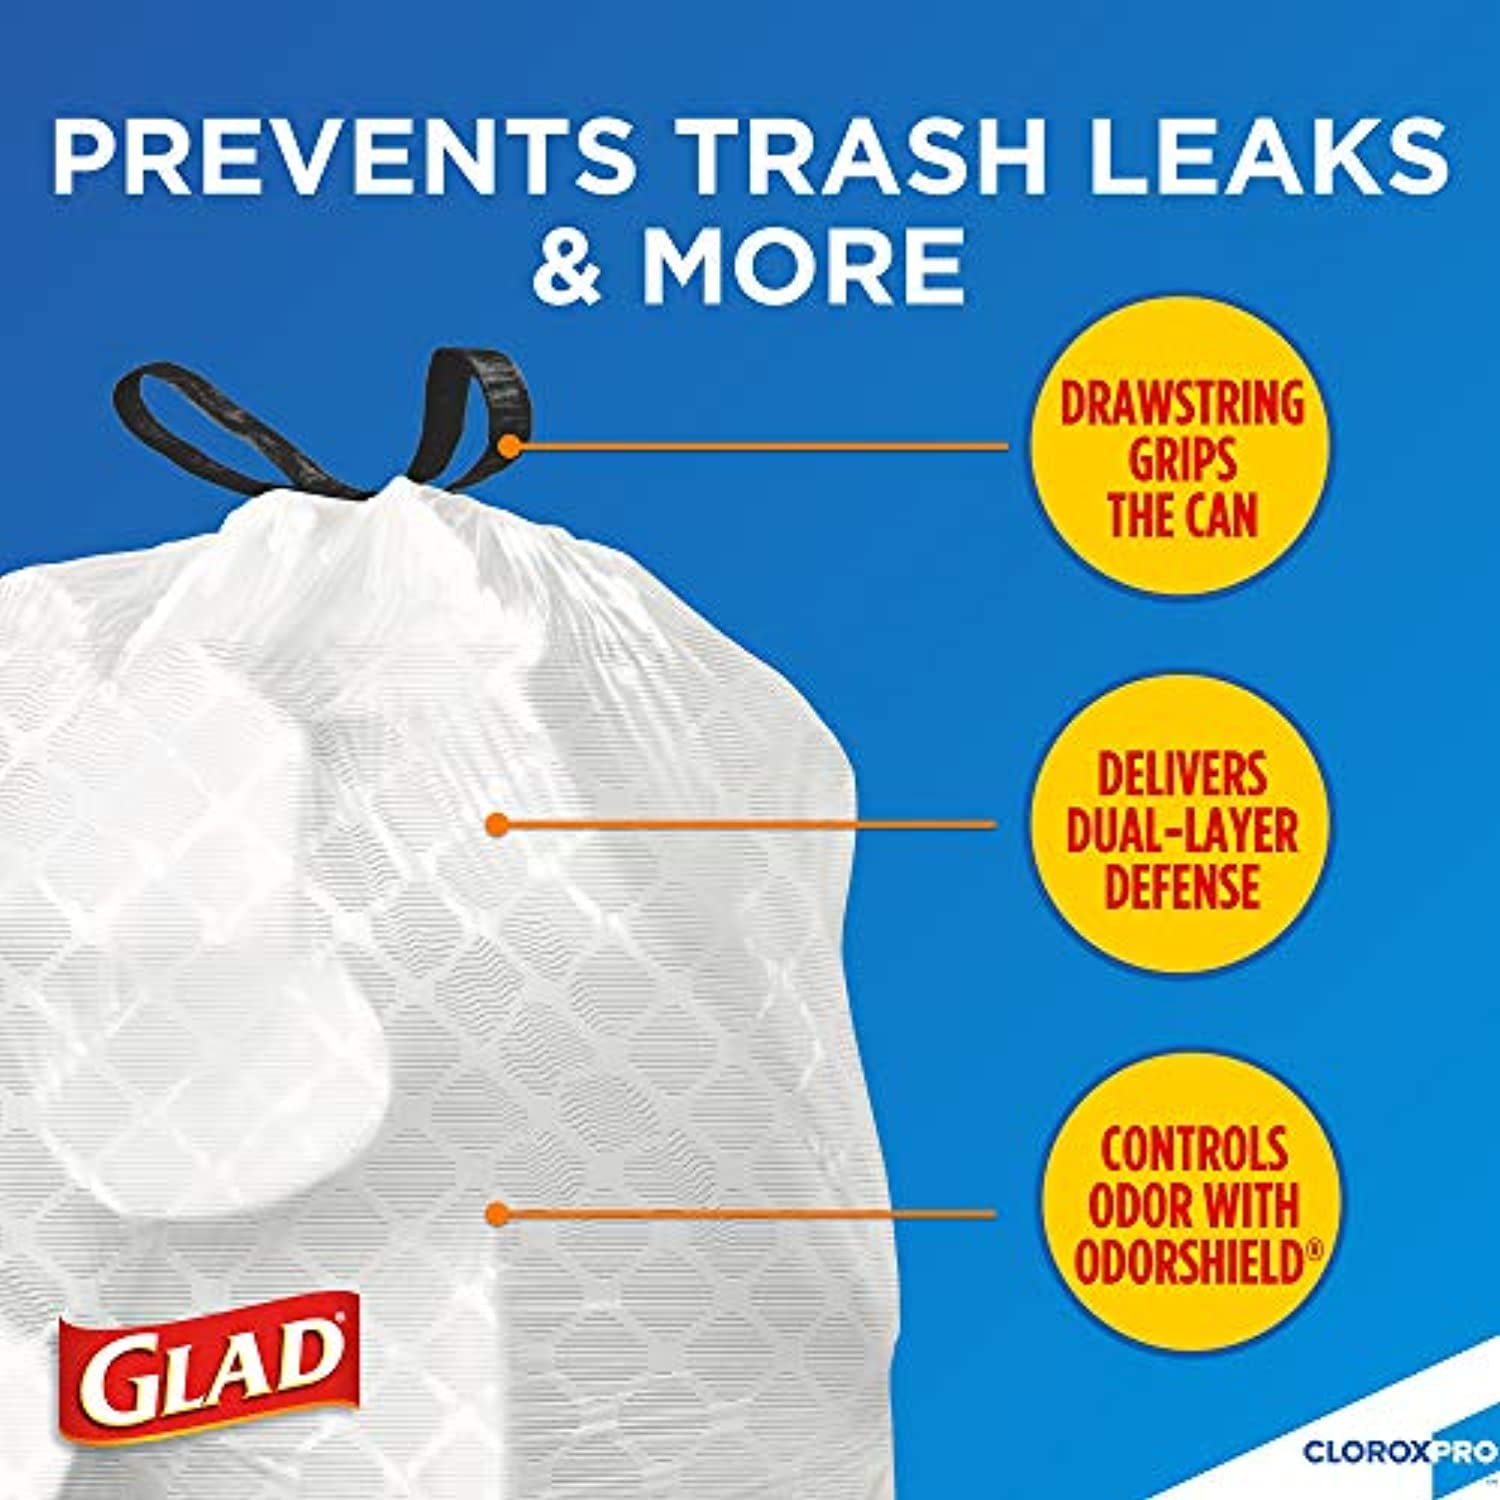 Glad ForceFlex 13 Gal. White Tall Kitchen Drawstring Unscented Trash Bags  (90-Count) 1258778536 - The Home Depot